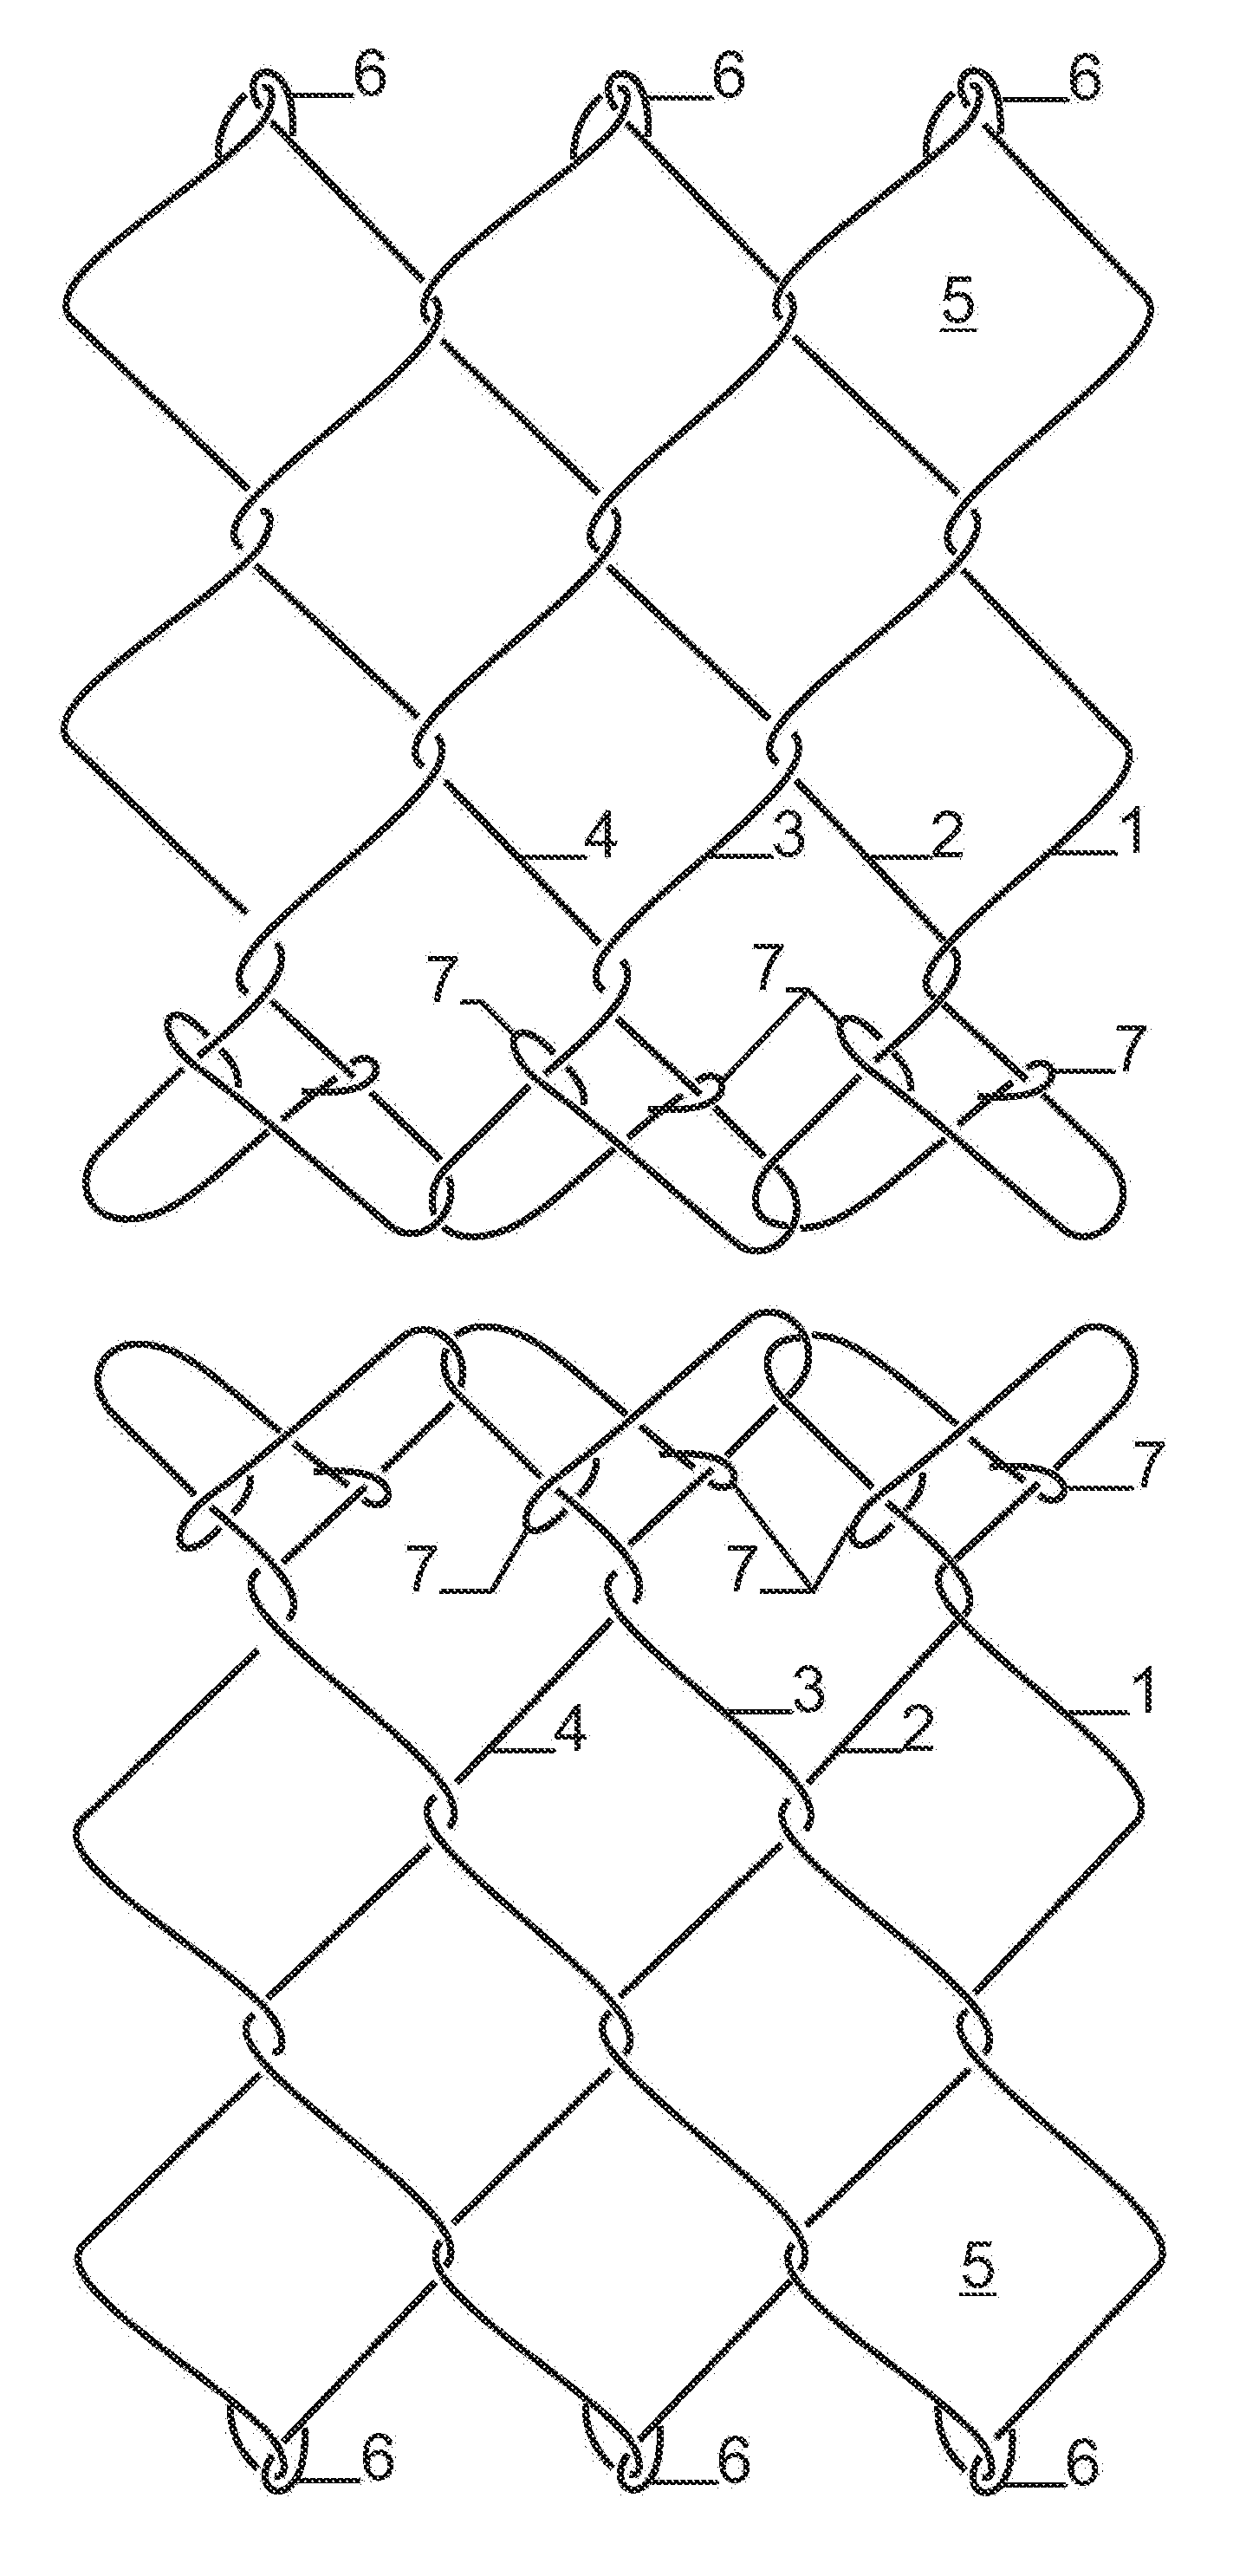 Mining mesh with double knot